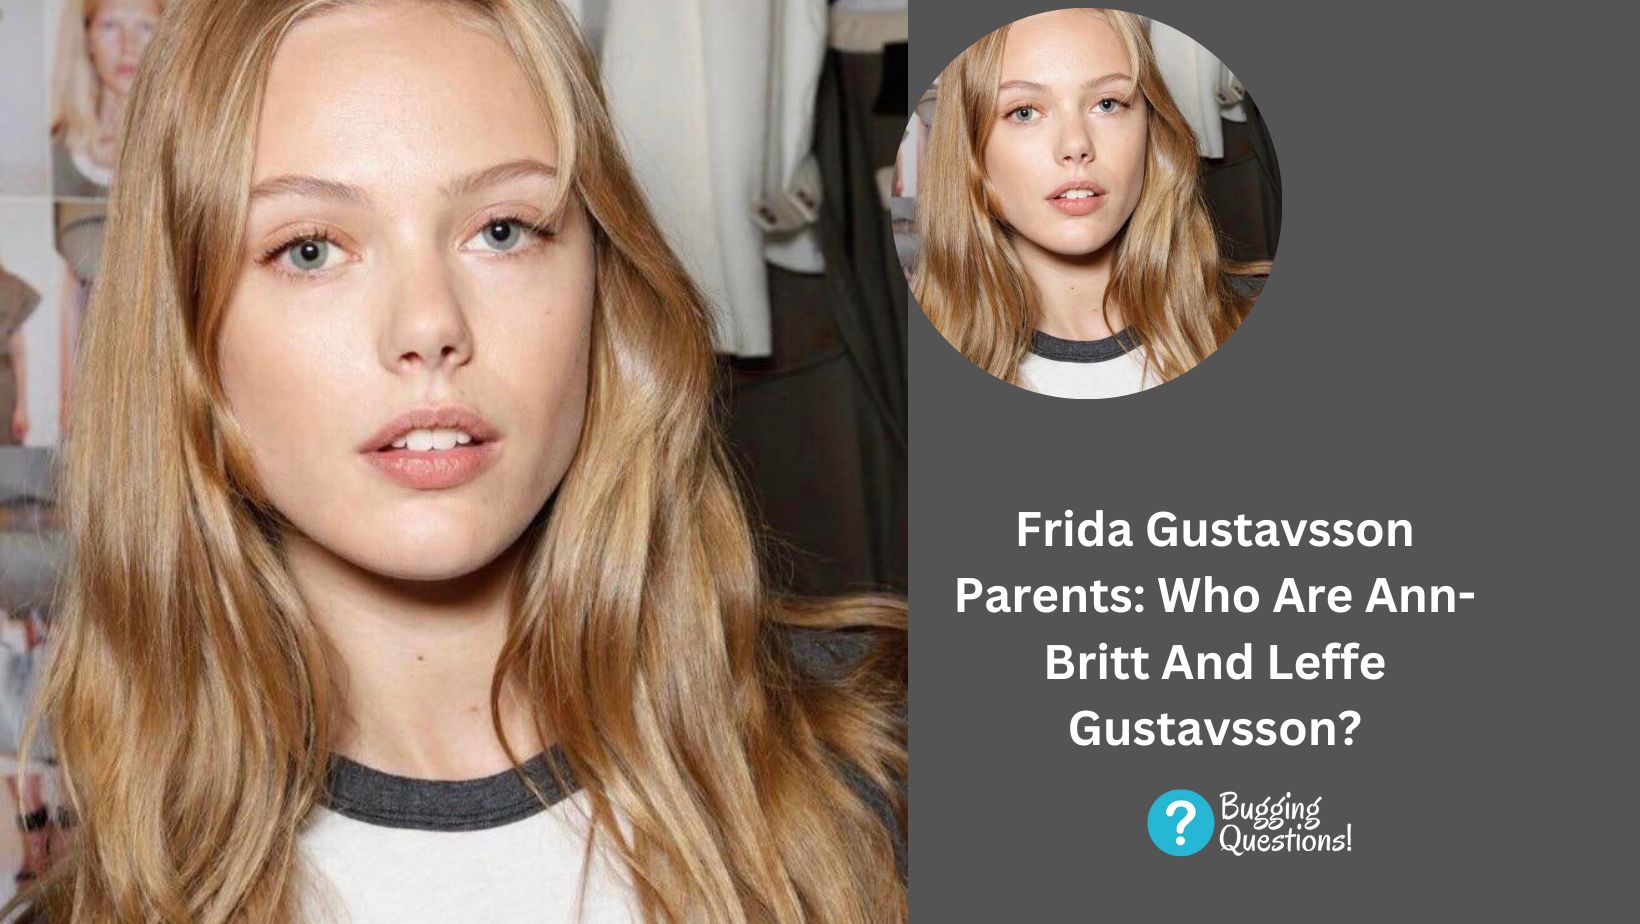 Frida Gustavsson Parents: Who Are Ann-Britt And Leffe Gustavsson?